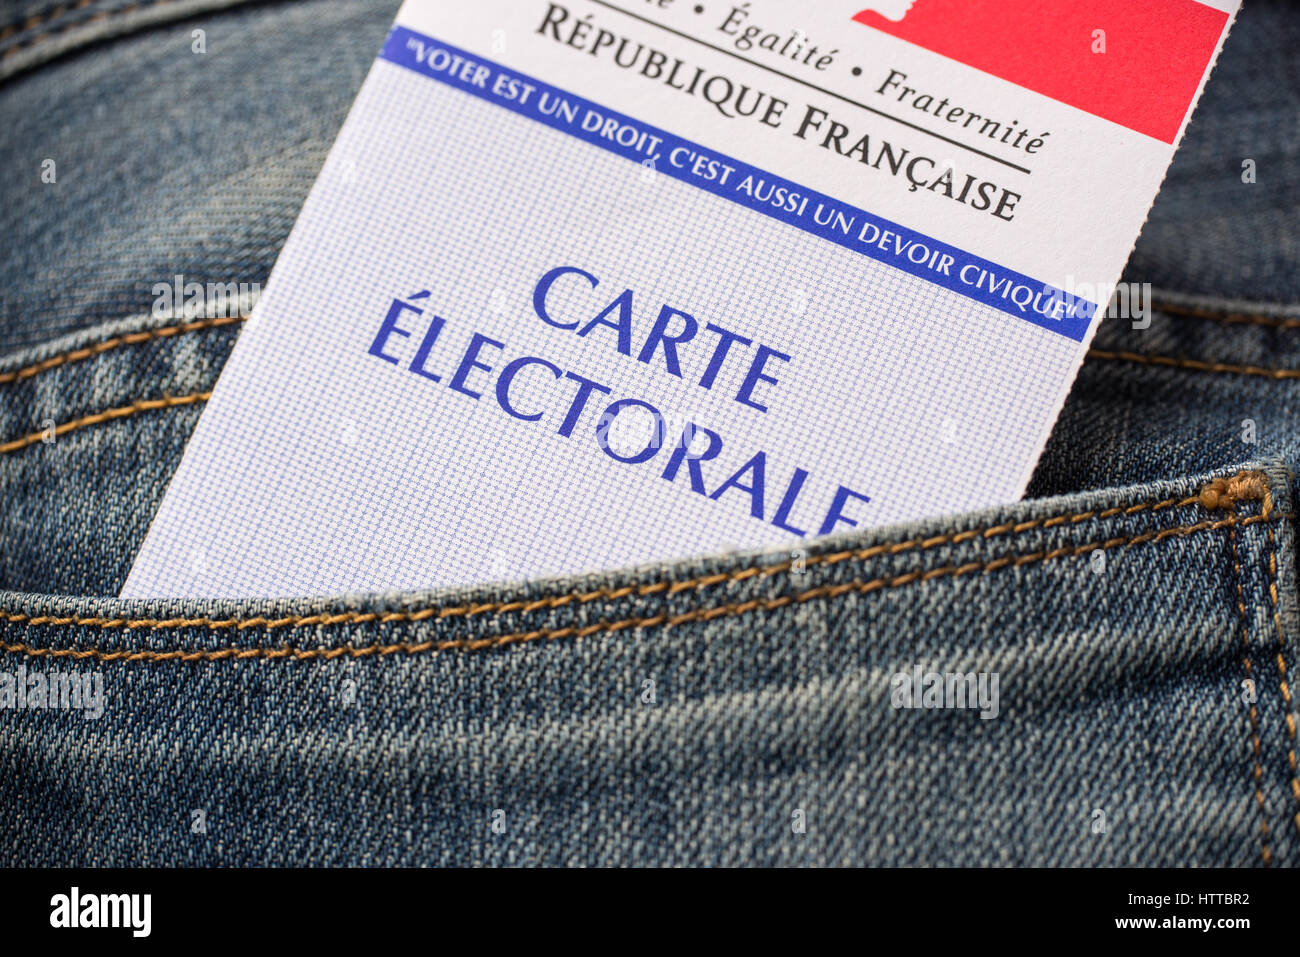 French electoral card in the rear pocket of a jeans, 2017 presidential elections concept Stock Photo